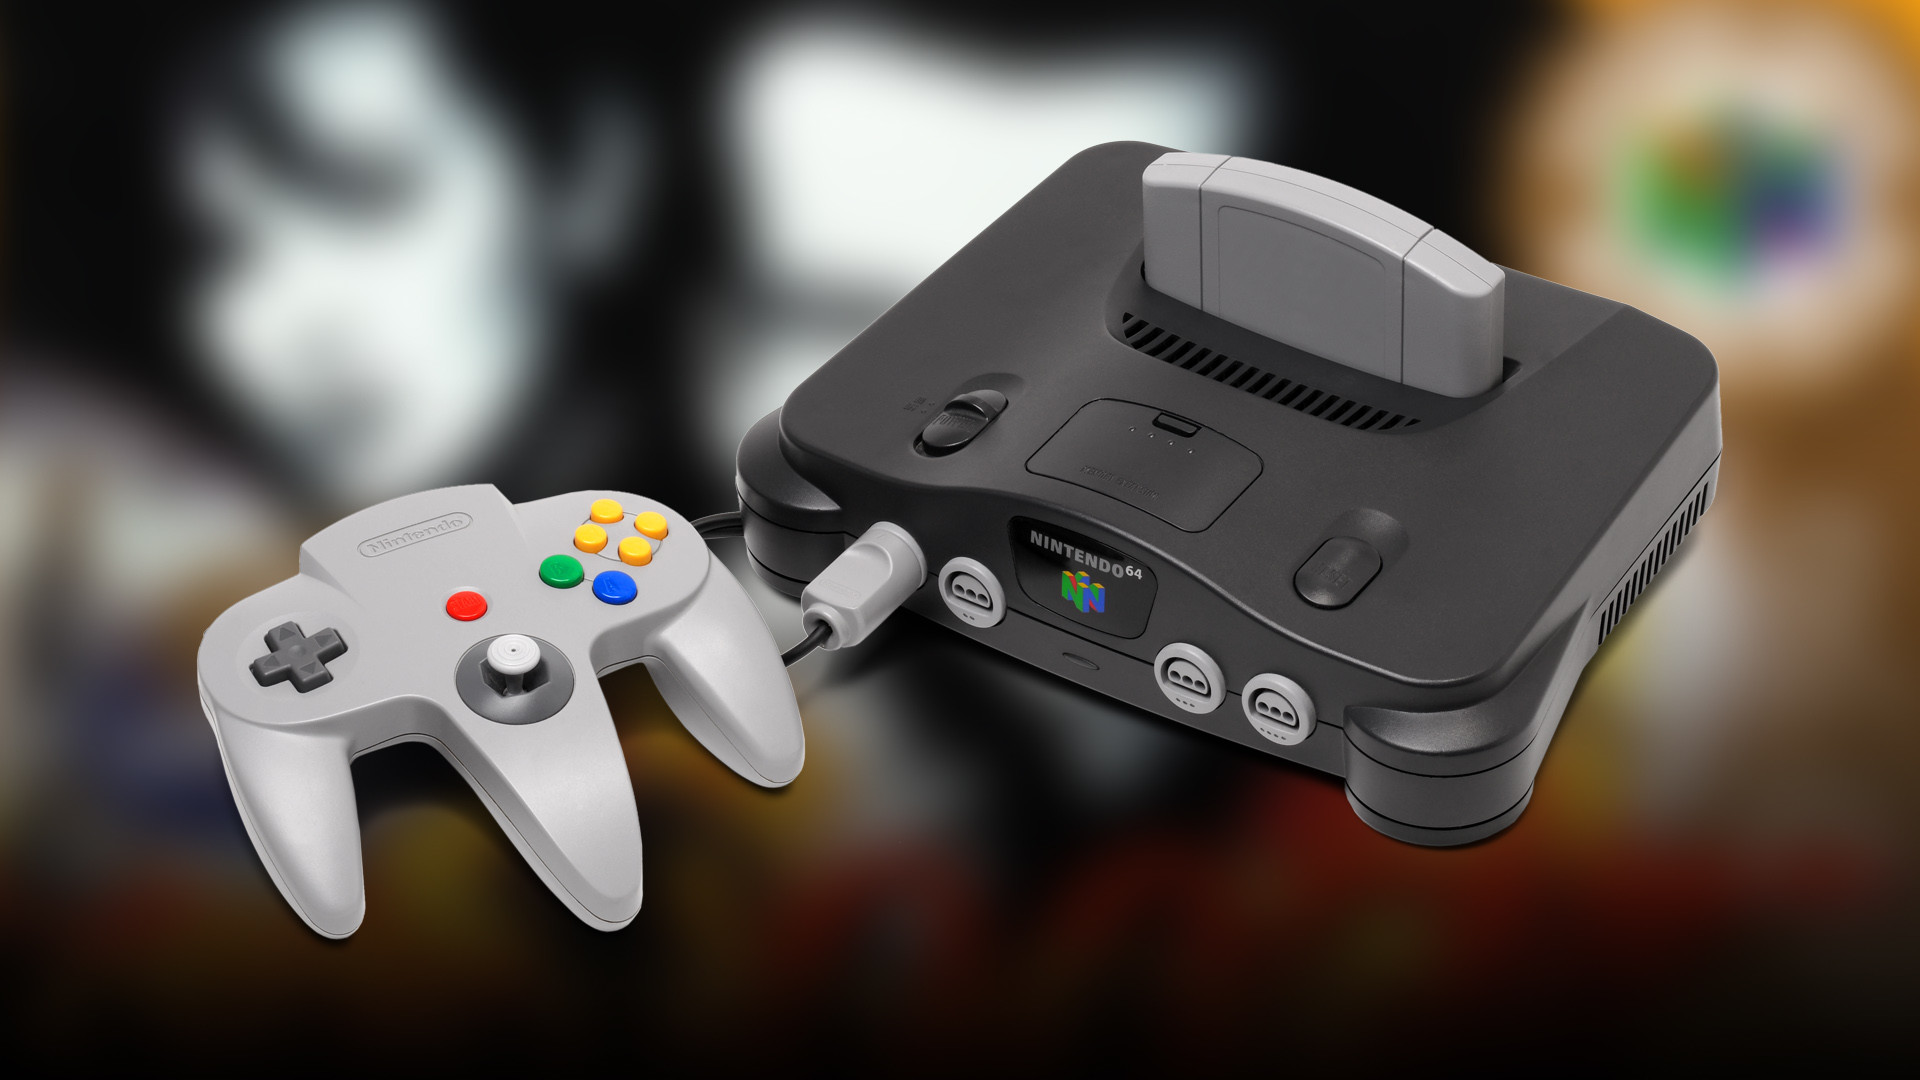 1920x1080 The Nintendo 64: The console that launched a revolution | Nintendo Wire